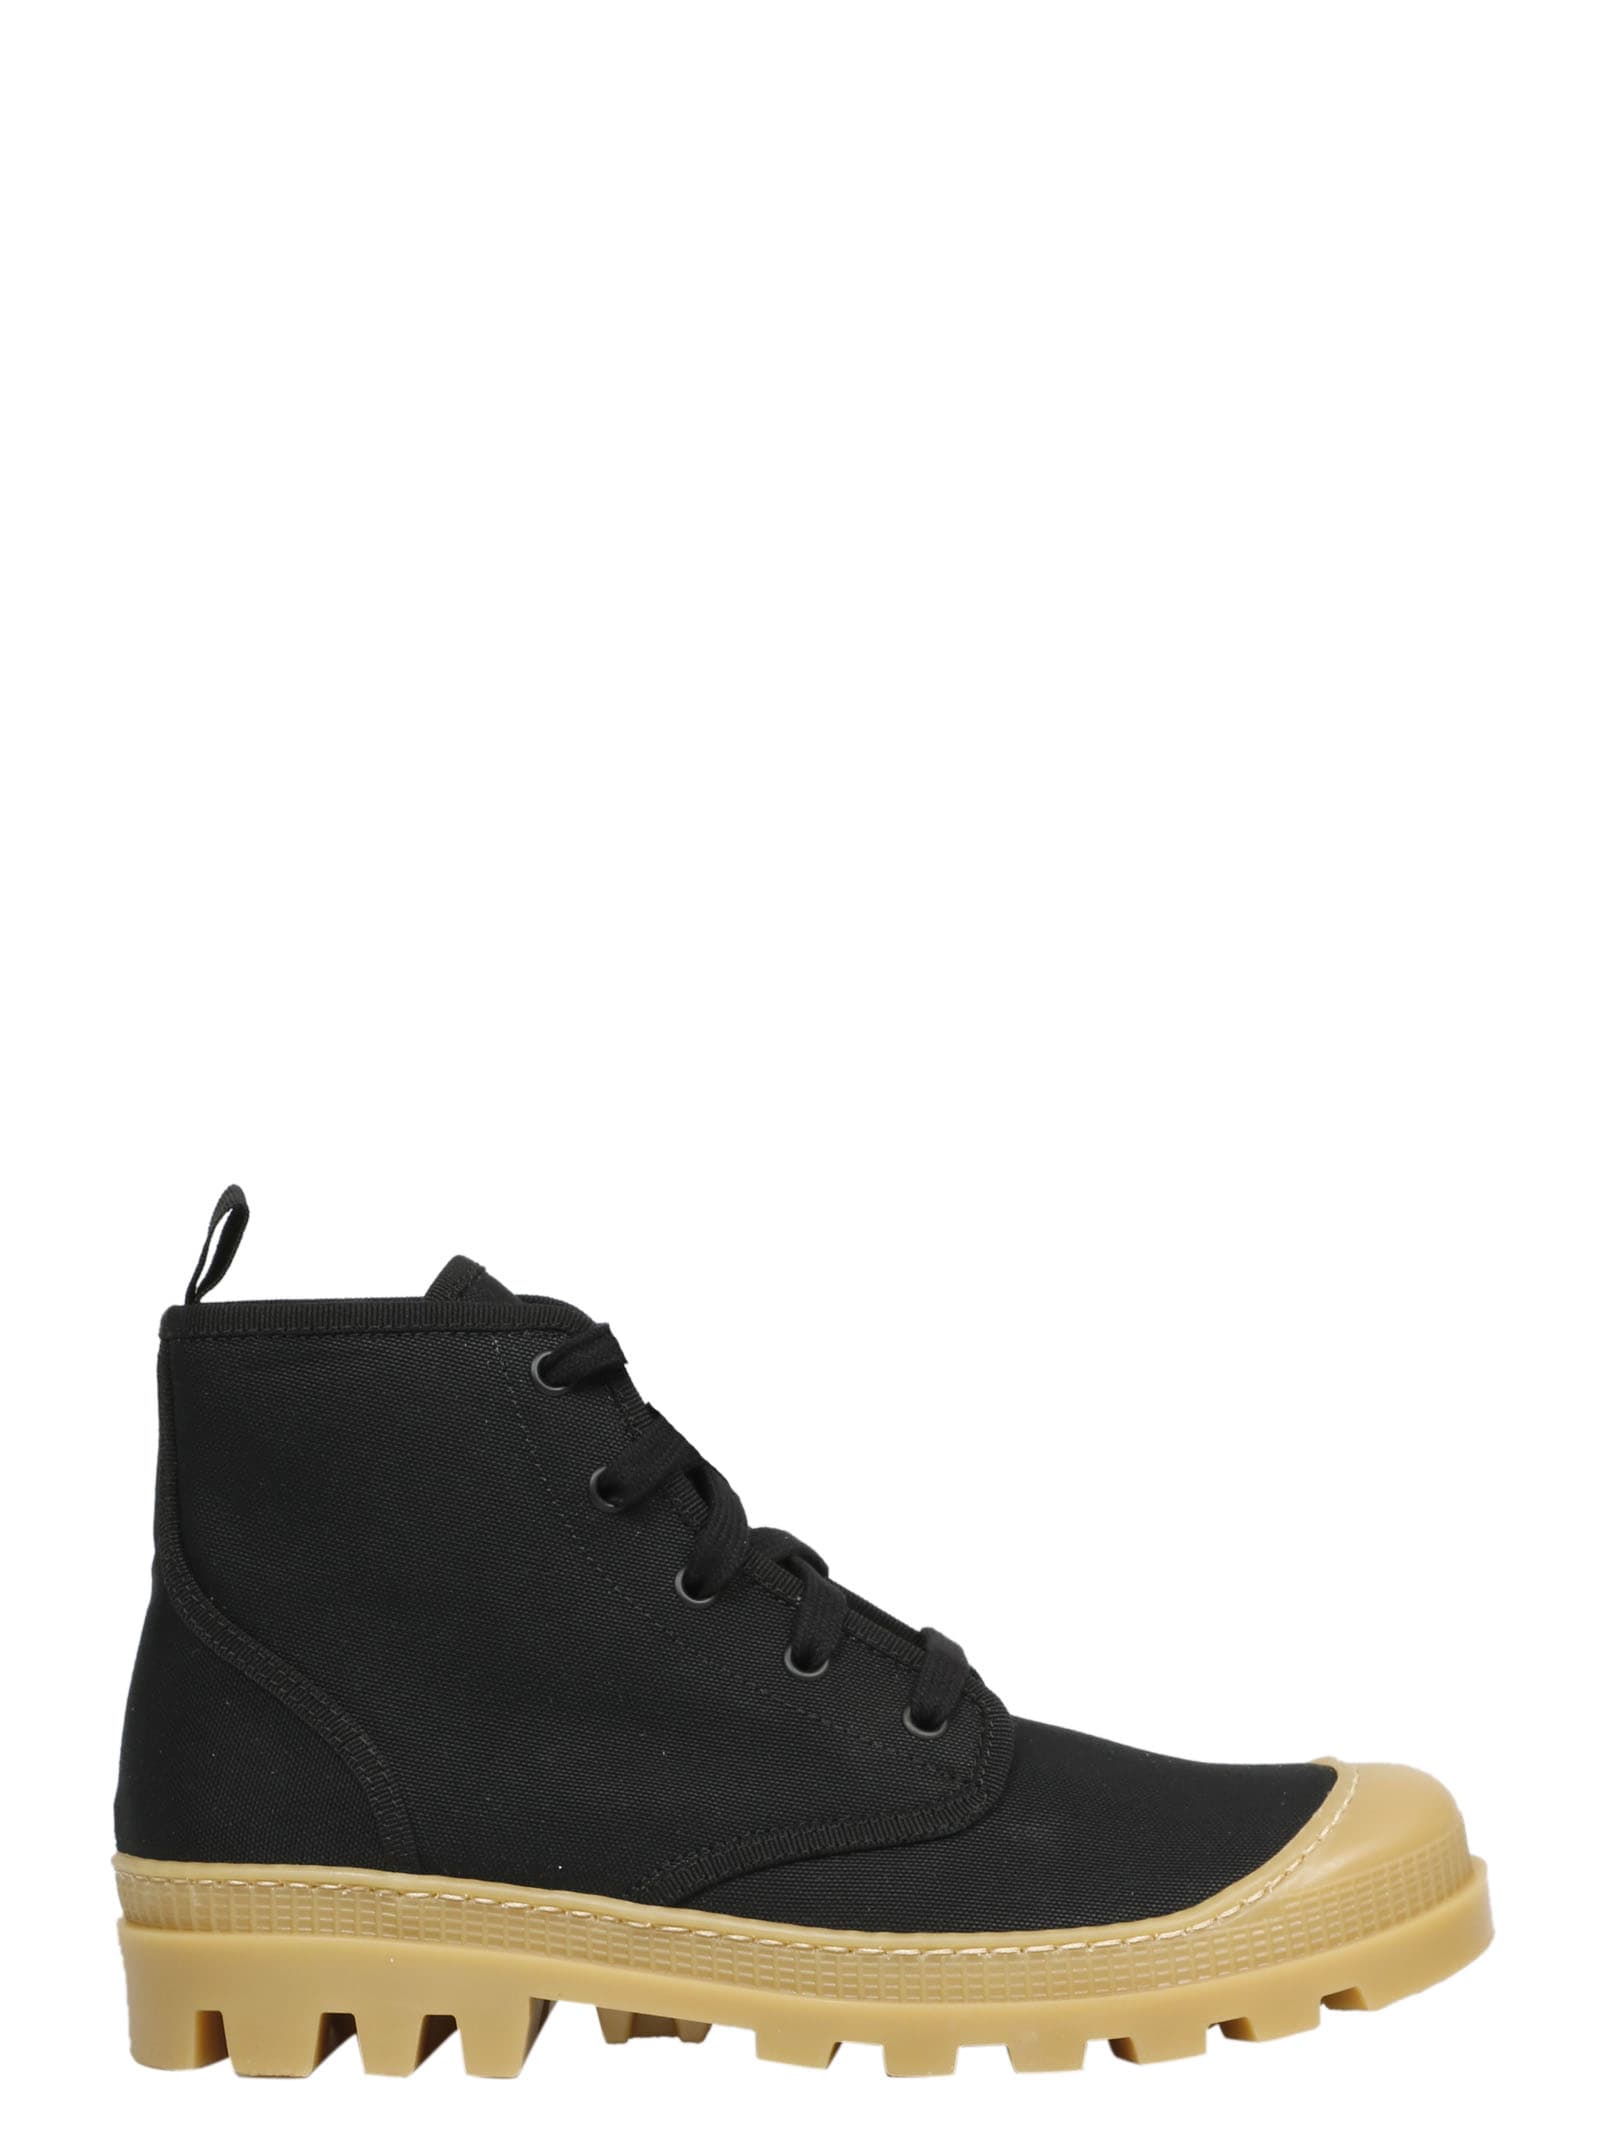 Gia X Pernille Teisbaek Canvas Lace-up Boots